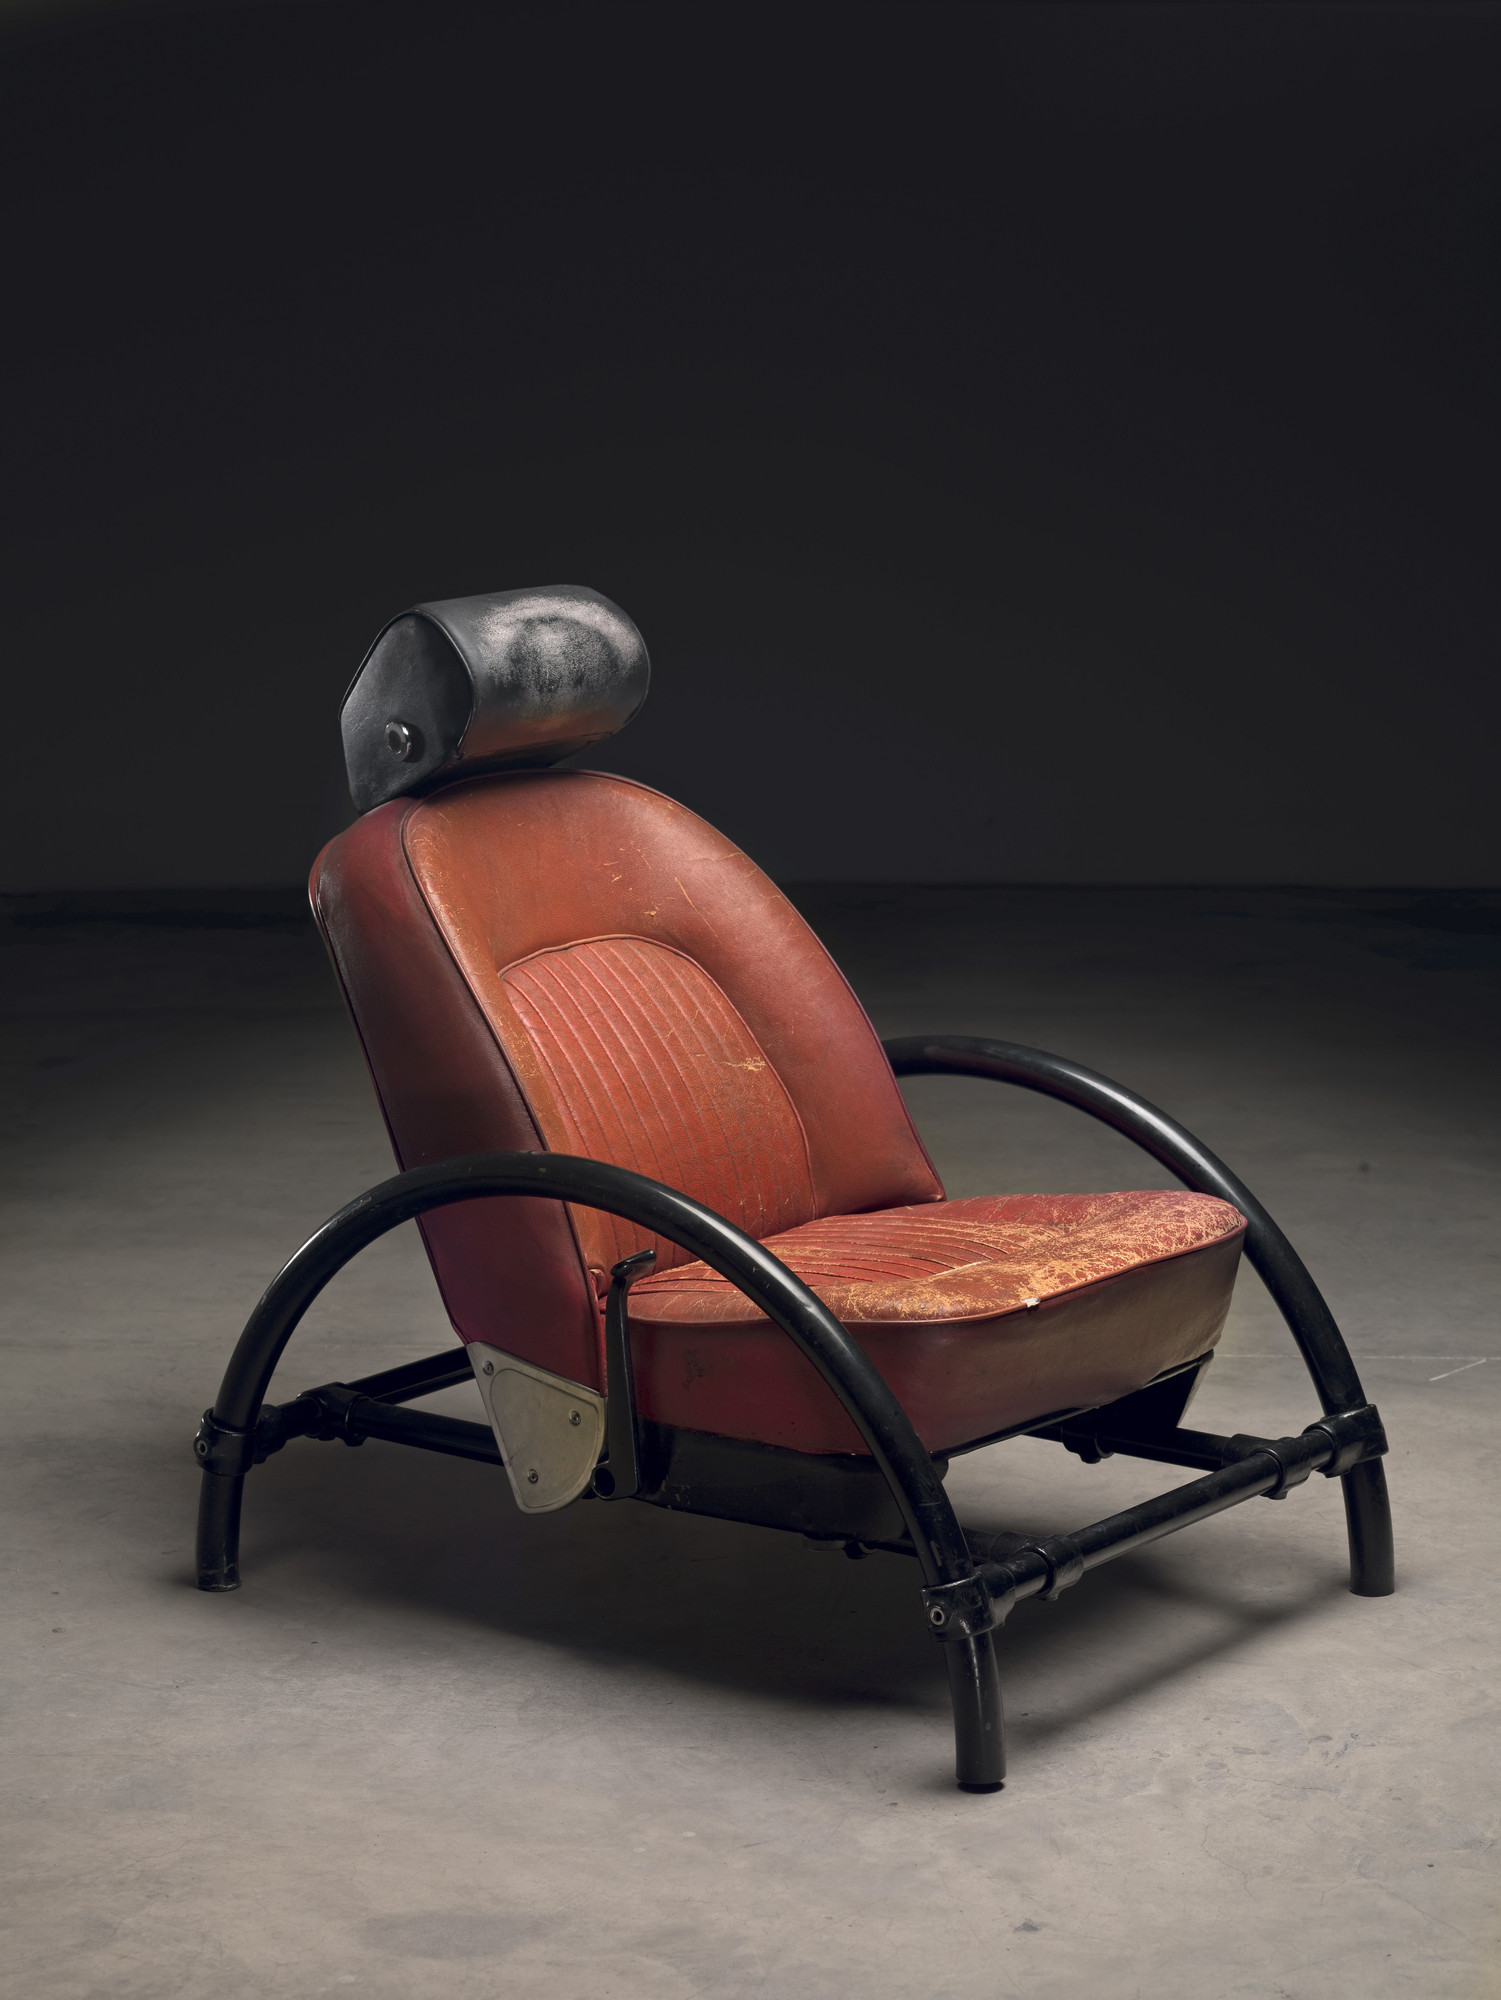 Ron Arad. Rover Chairs. 1981 | MoMA